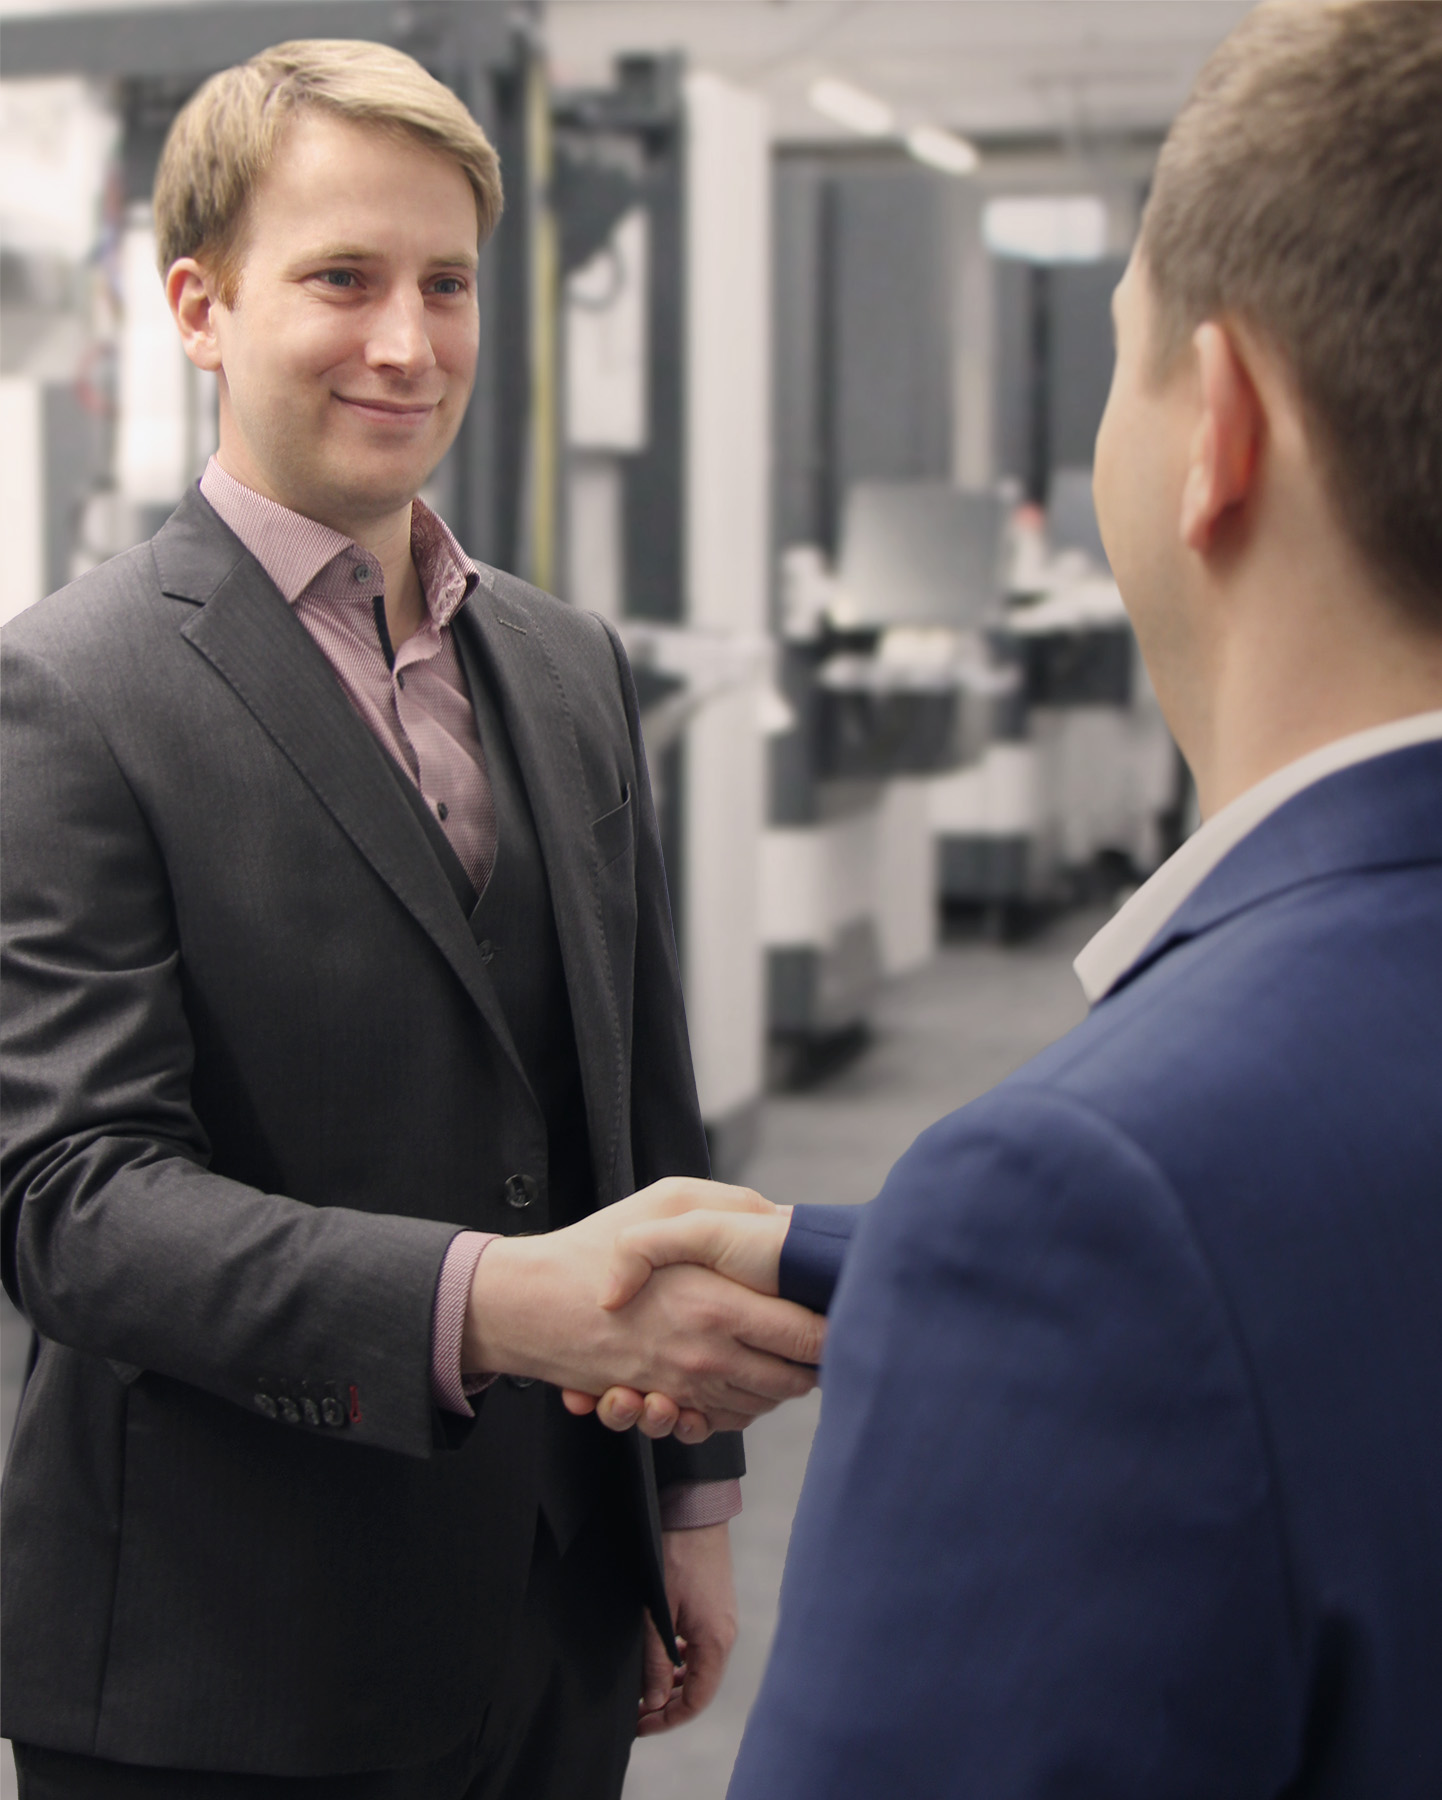 „For us, a trusting cooperation starts with the first customer contact.” – Matthias Giray, Area Sales Manager at ROBOWORKER (in the picture on the left)